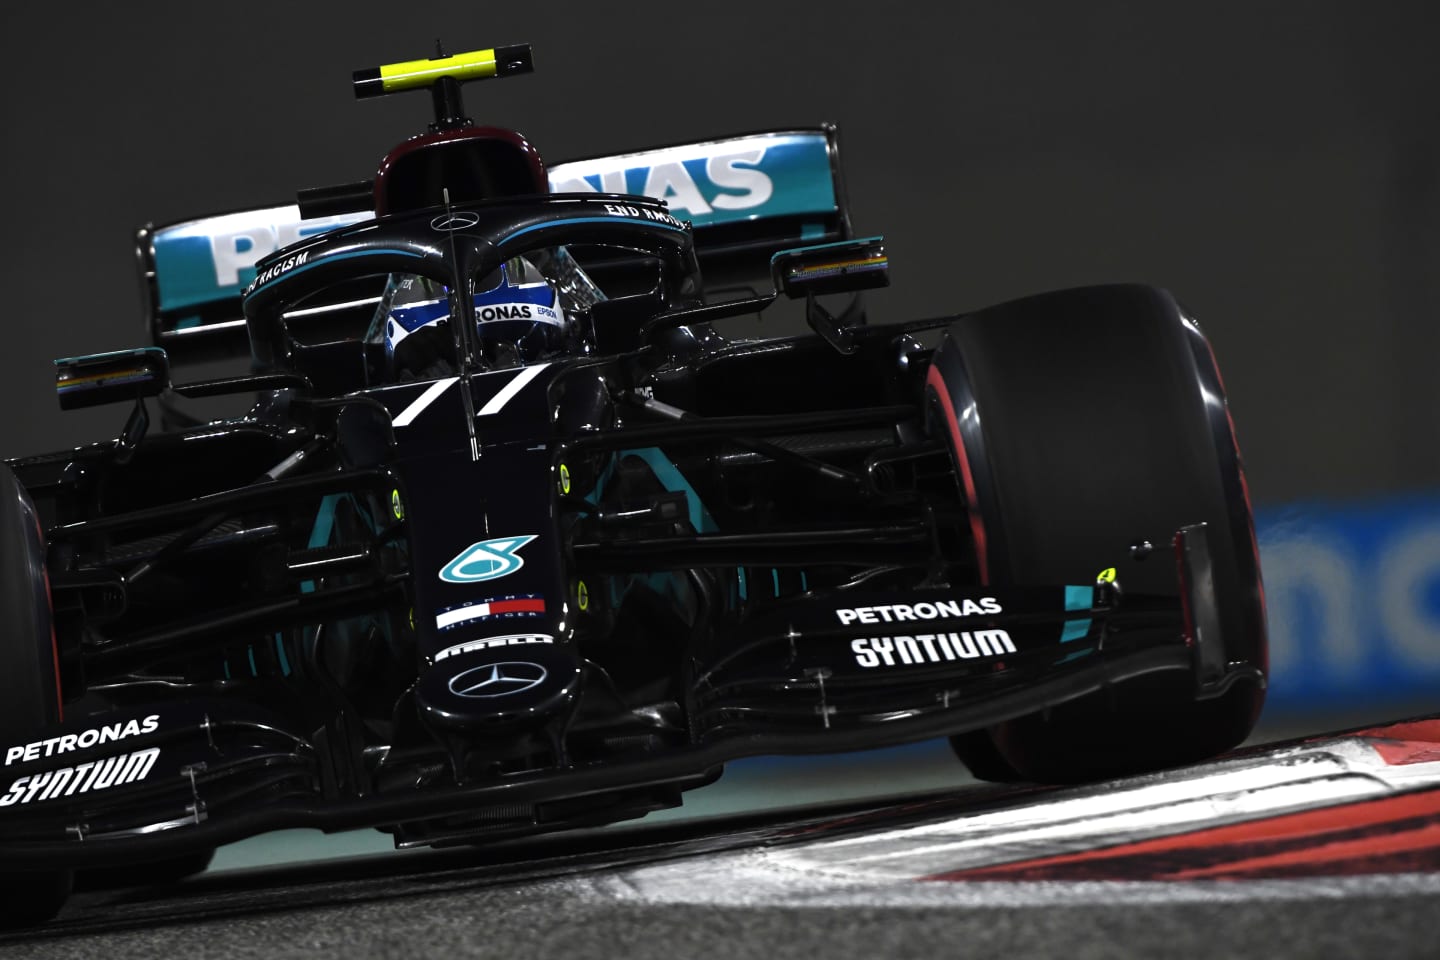 ABU DHABI, UNITED ARAB EMIRATES - DECEMBER 12: Valtteri Bottas of Finland driving the (77) Mercedes AMG Petronas F1 Team Mercedes W11 on track during qualifying ahead of the F1 Grand Prix of Abu Dhabi at Yas Marina Circuit on December 12, 2020 in Abu Dhabi, United Arab Emirates. (Photo by Rudy Carezzevoli/Getty Images)